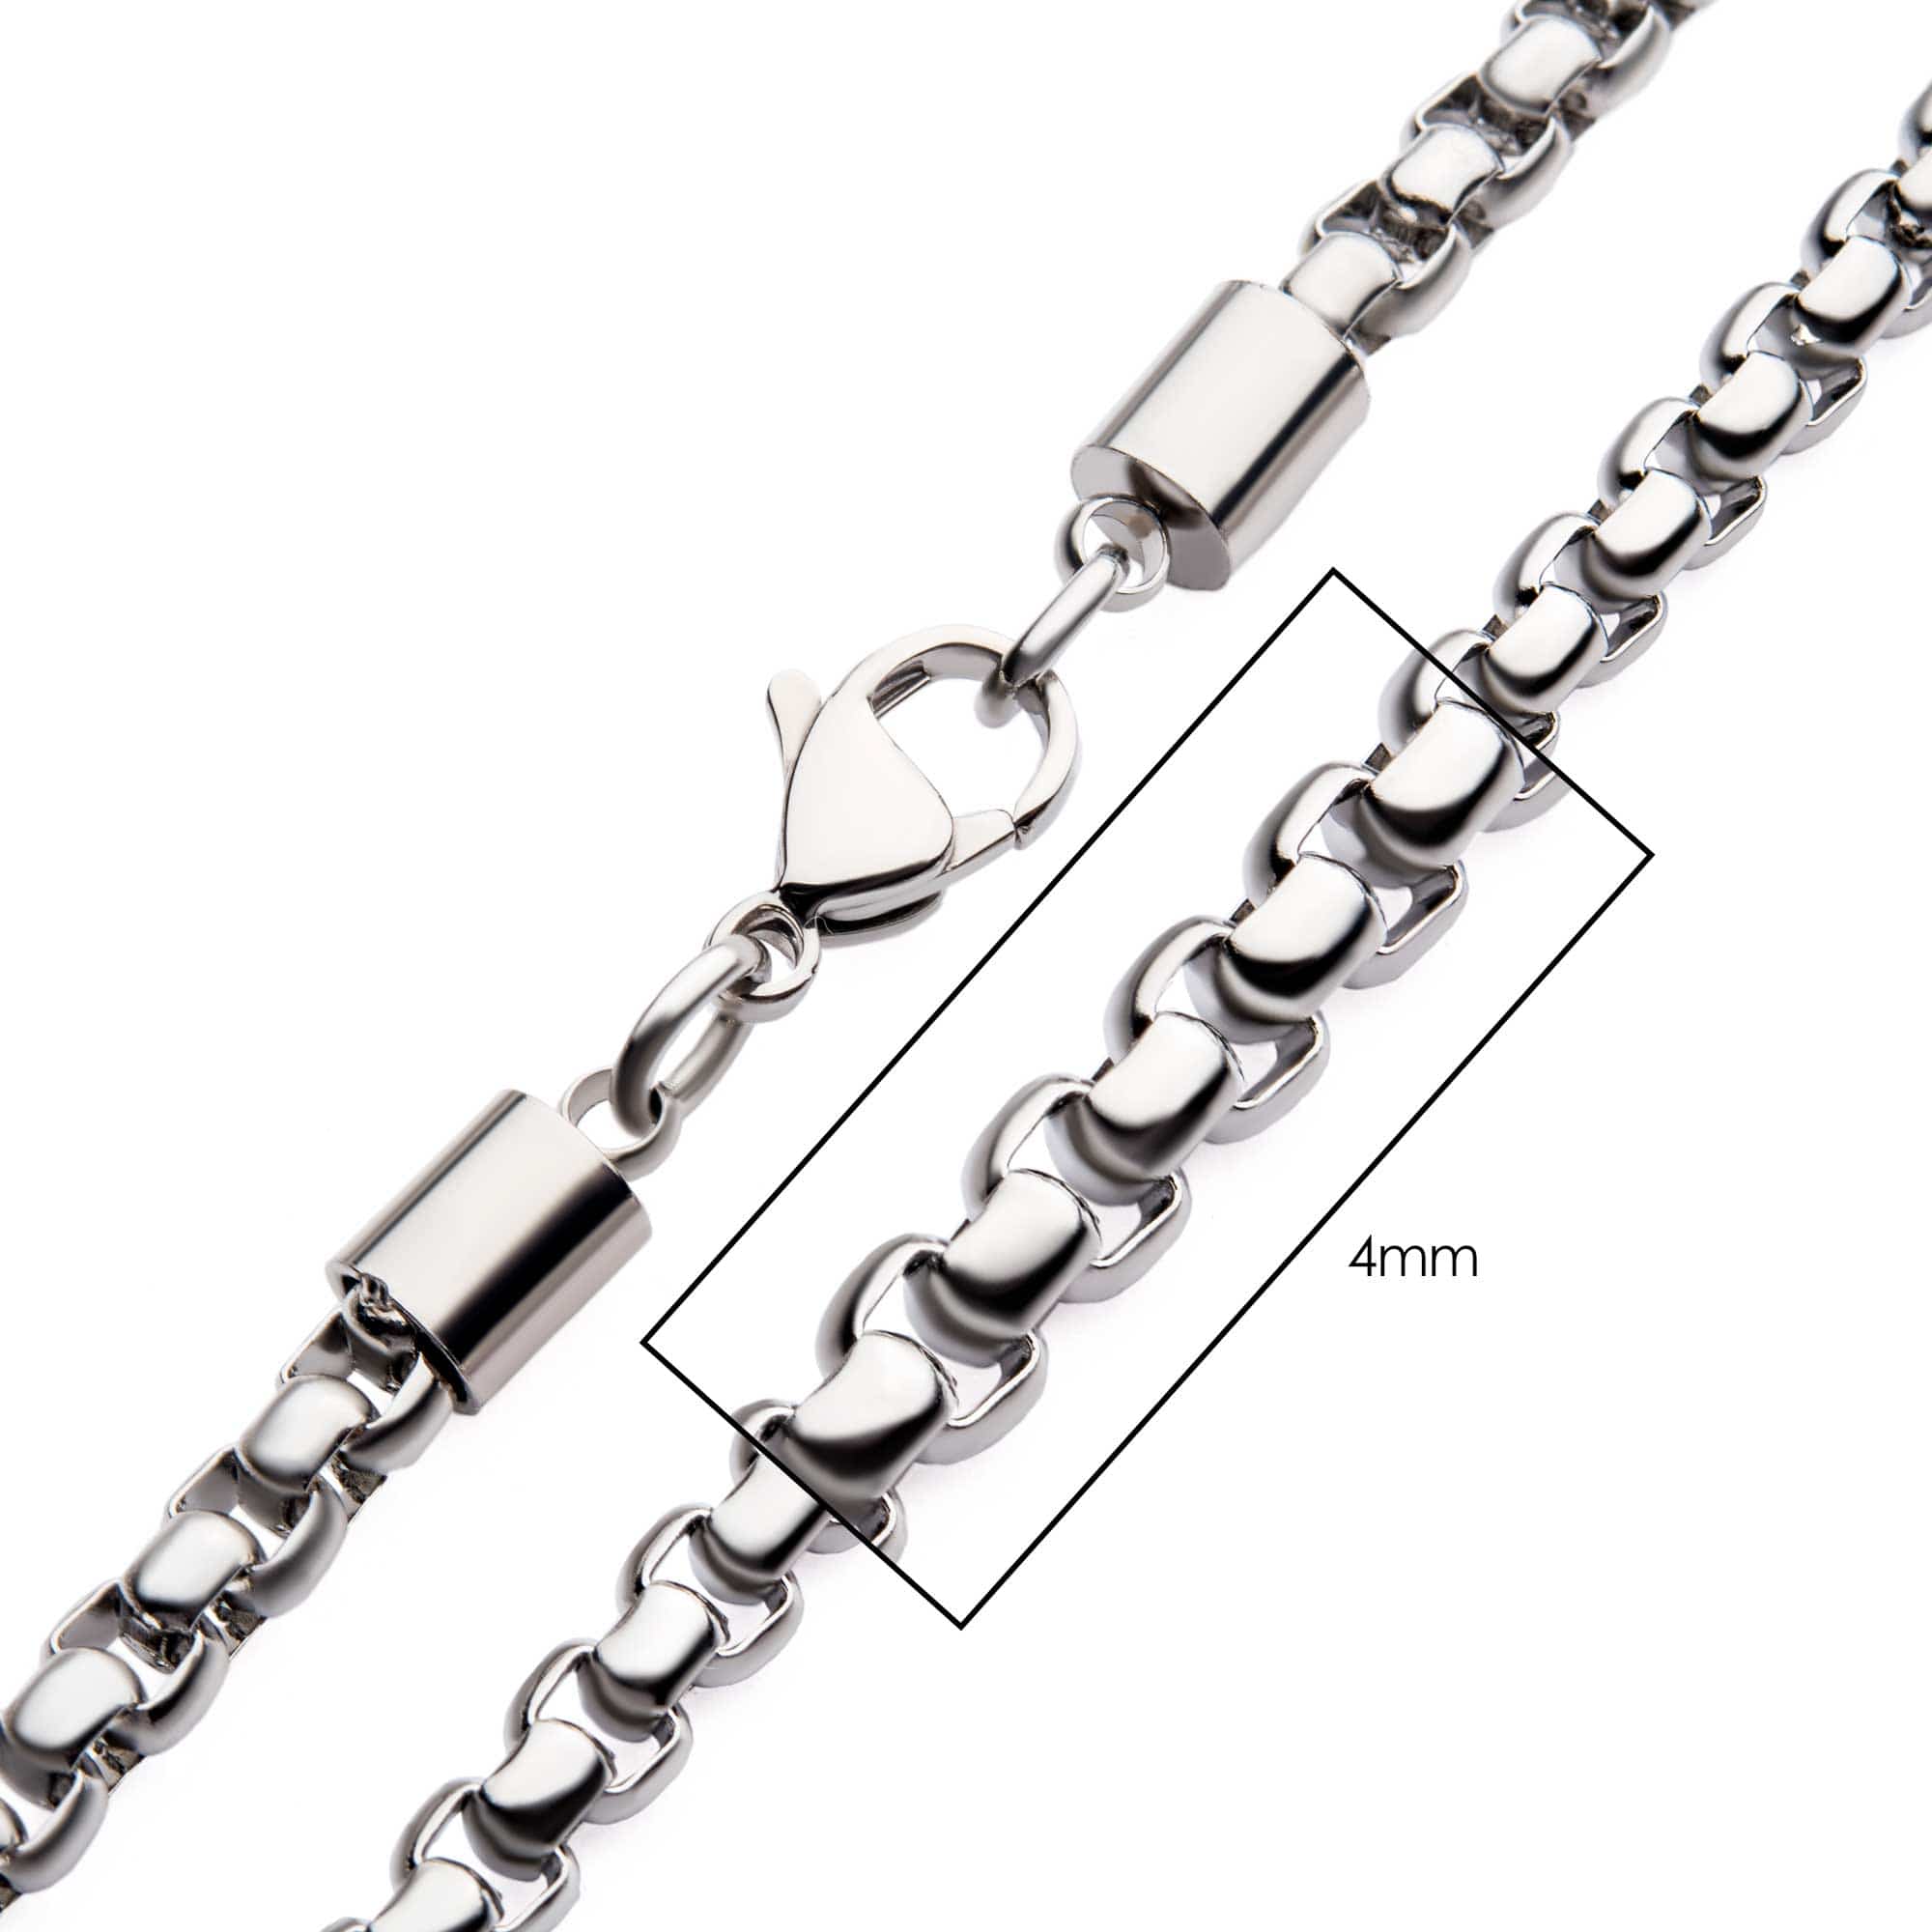 INOX JEWELRY Chains Silver Tone Stainless Steel 4mm Bold Box Chain